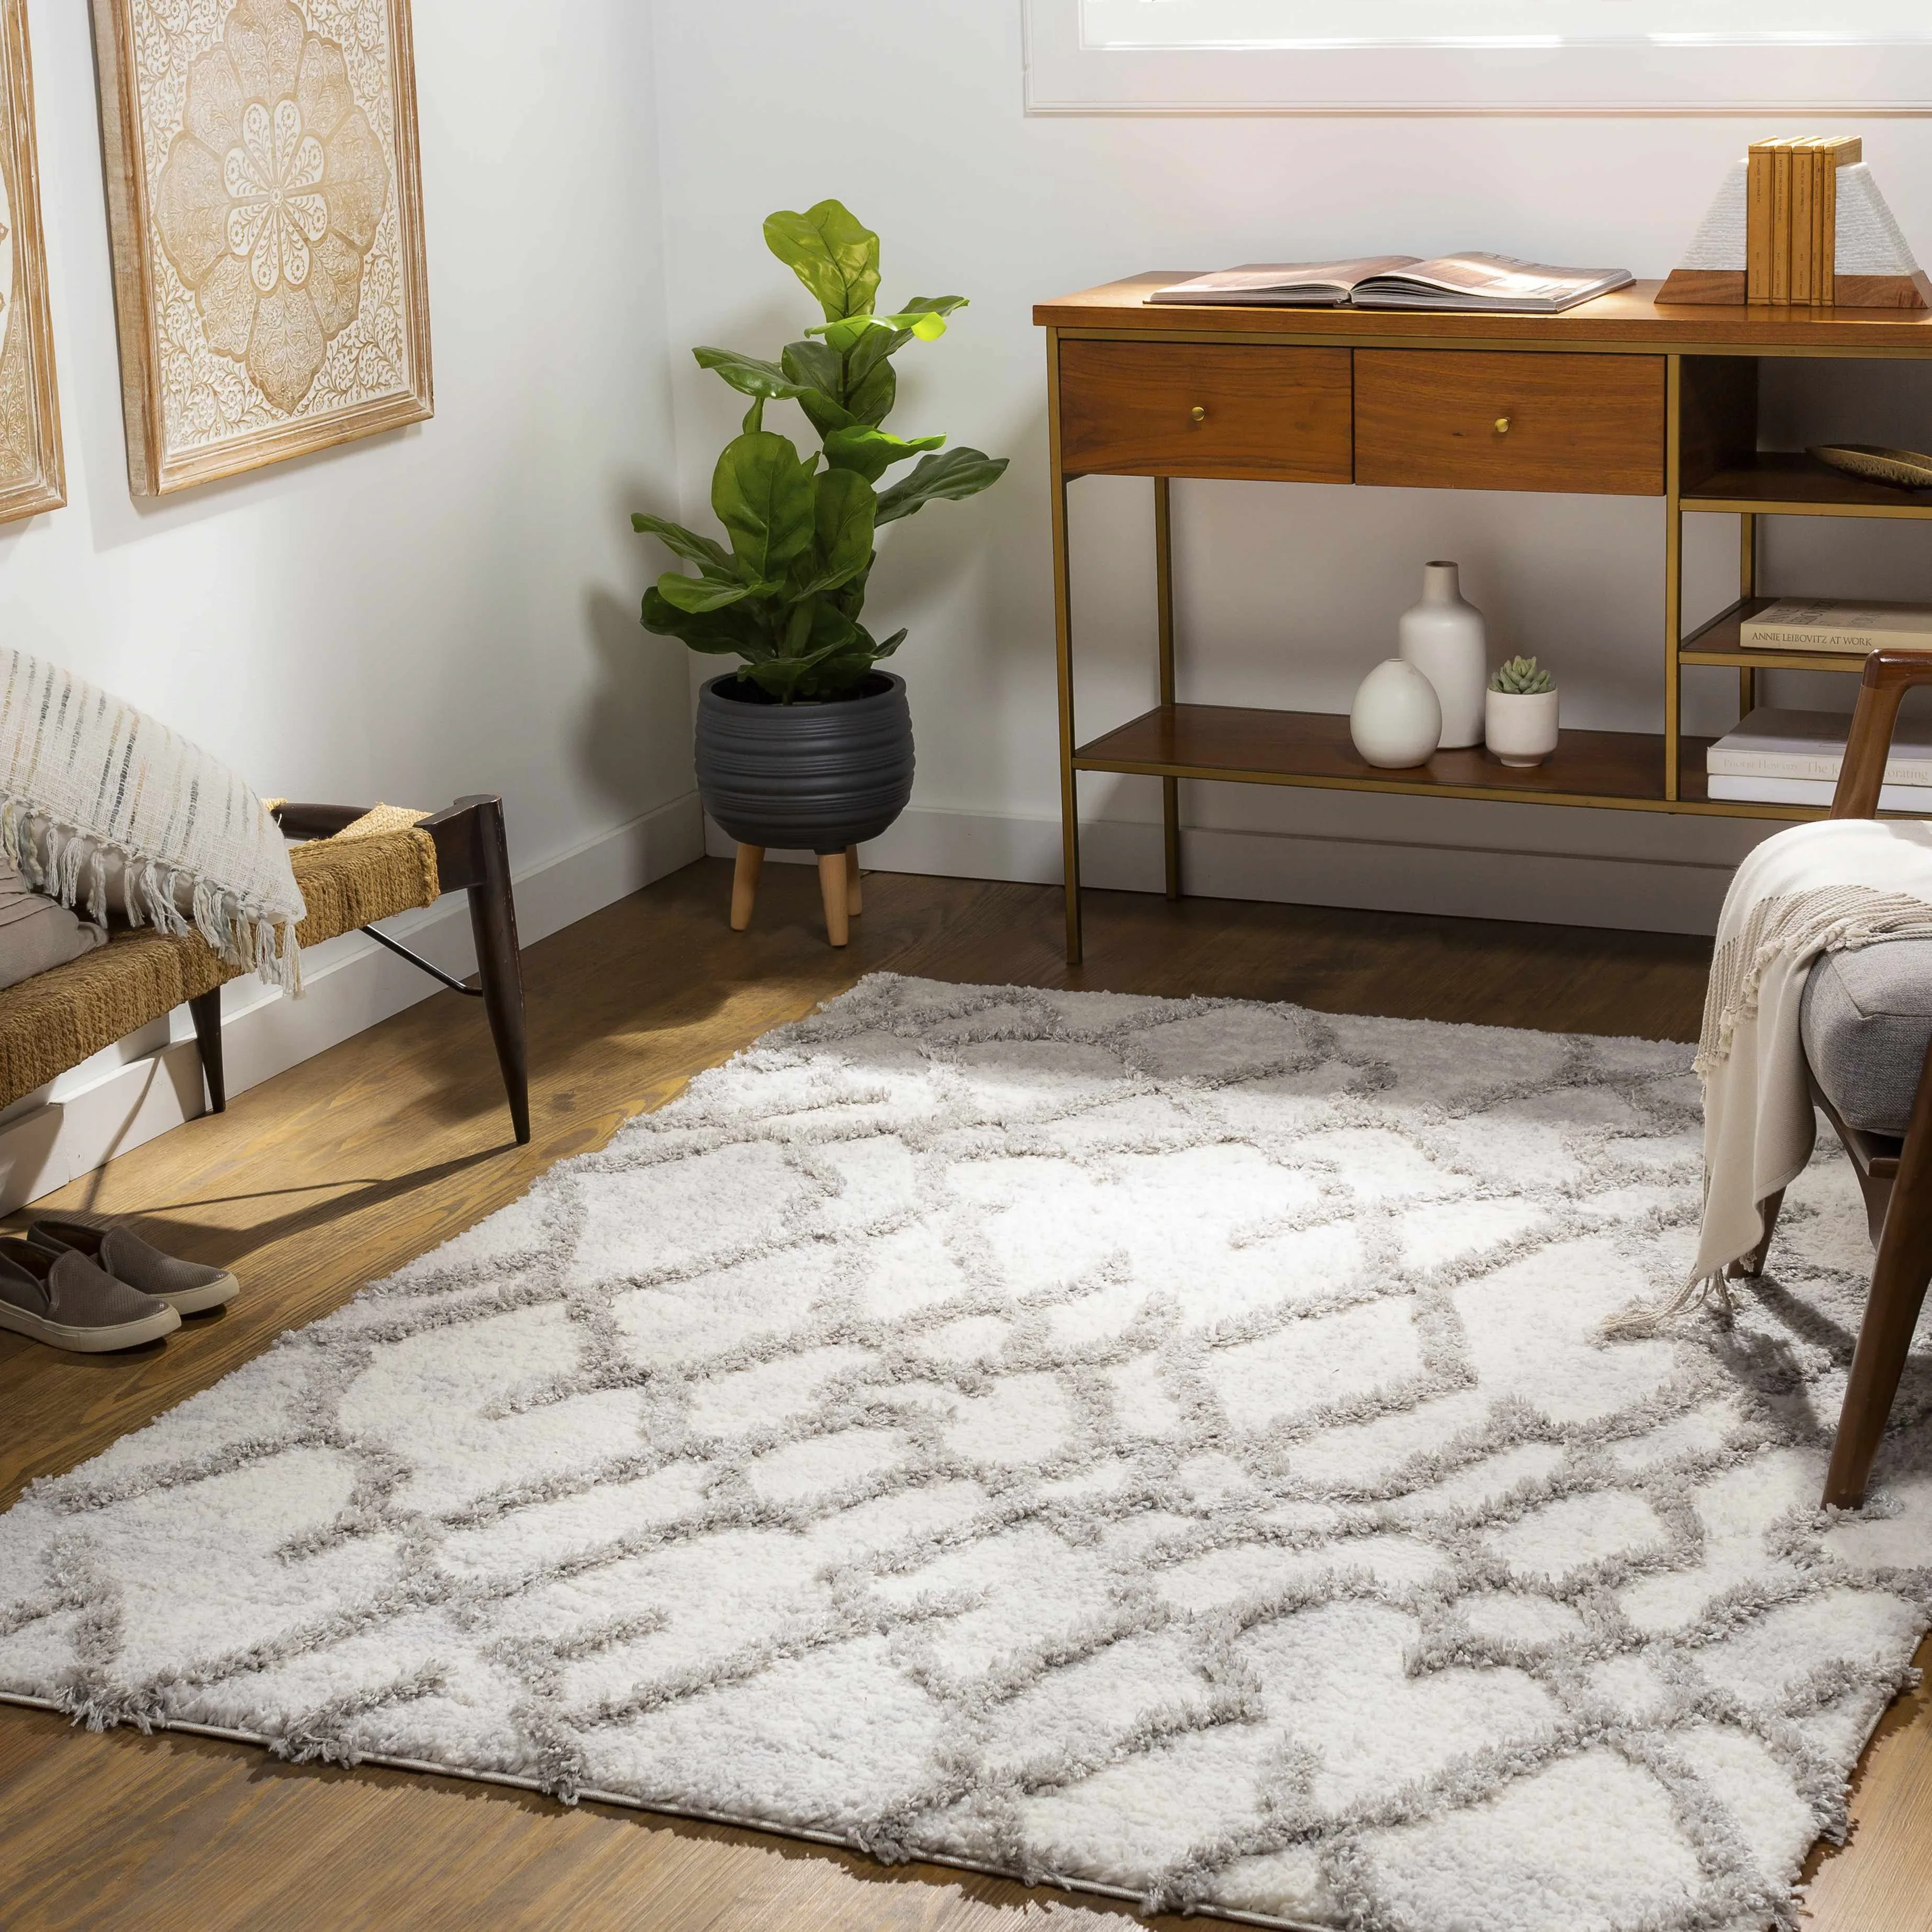 Small X Large White Fluffy Rug Living Room Shaggy Pile New Carpet Round Bedroom 